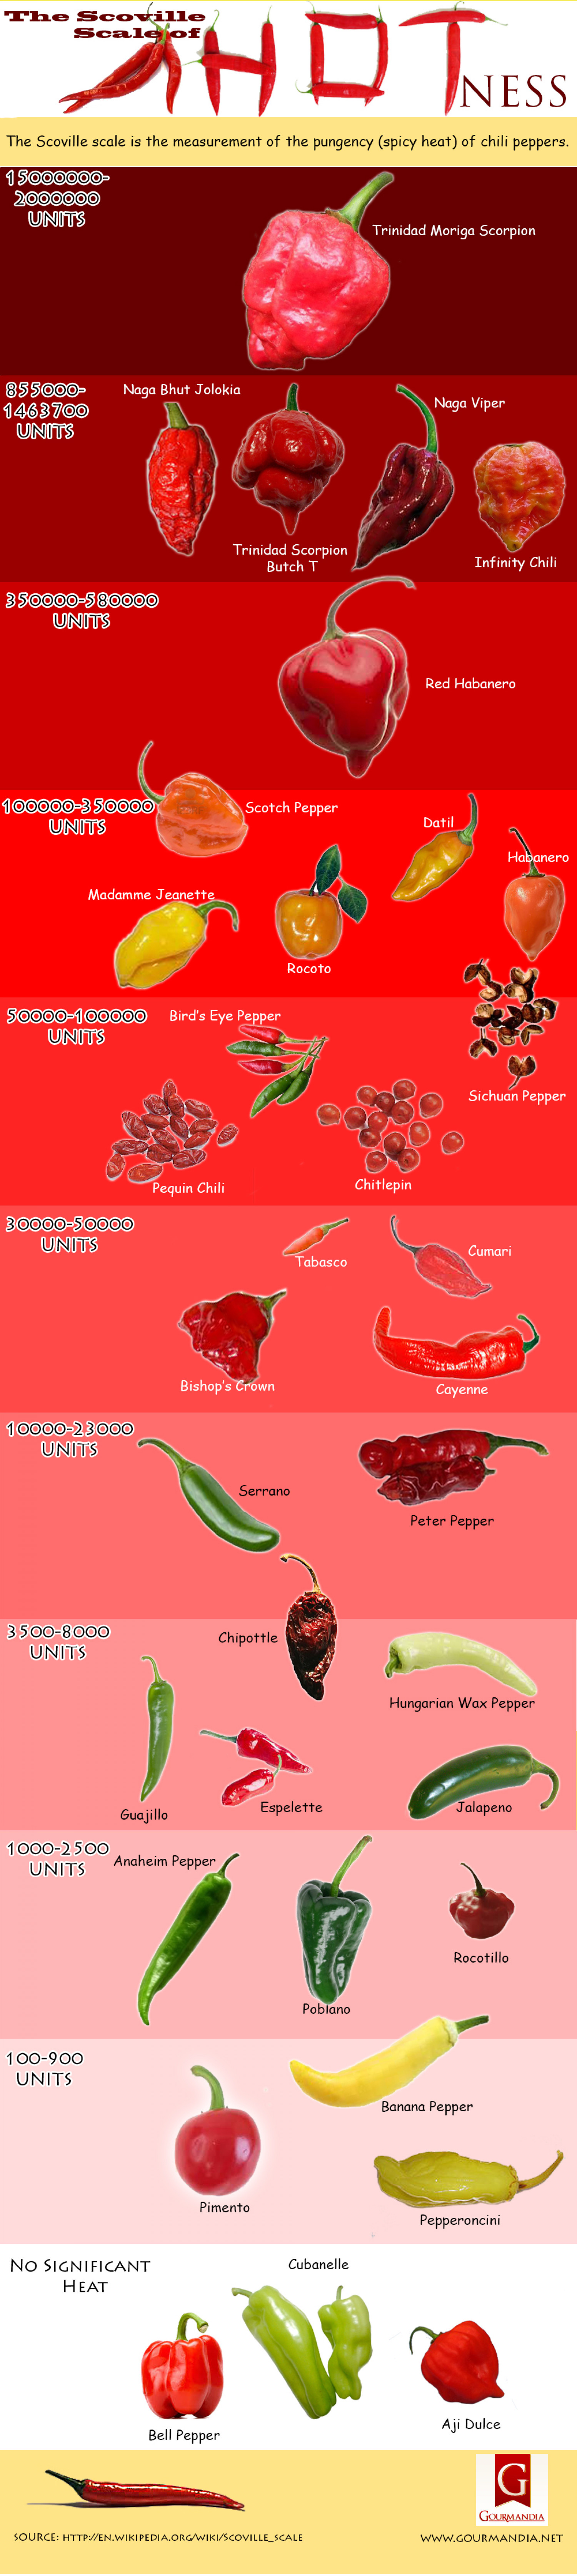 What Is the Scoville Scale?